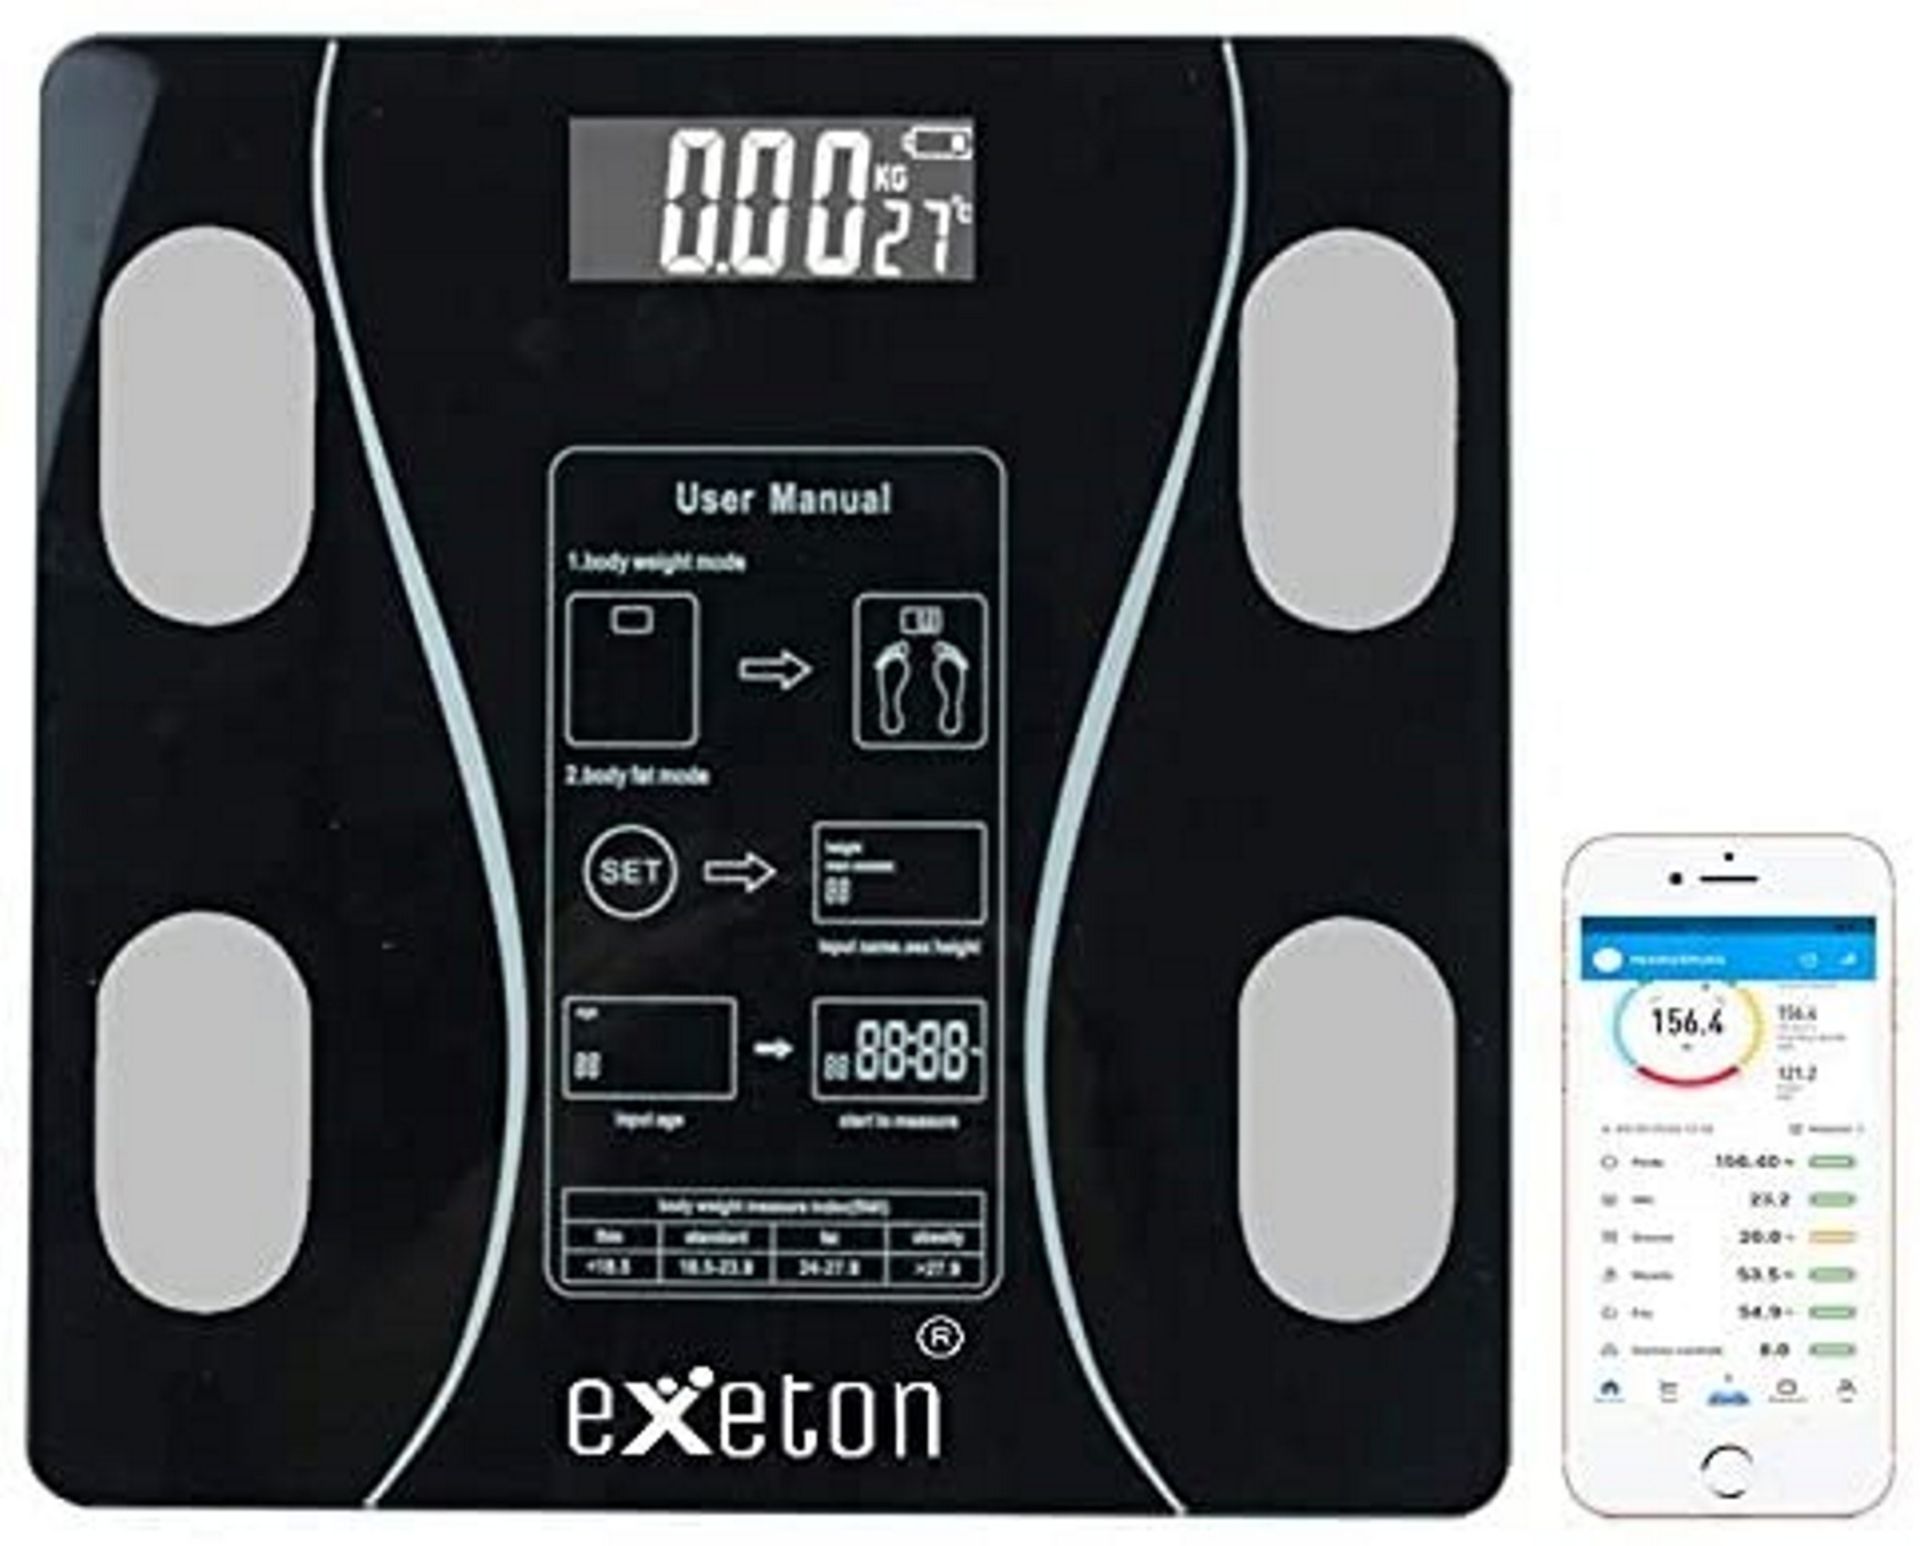 Exeton Smart Bluetooth Body Weighing Scale, Body Fat Scale, BMI Weighing Scales